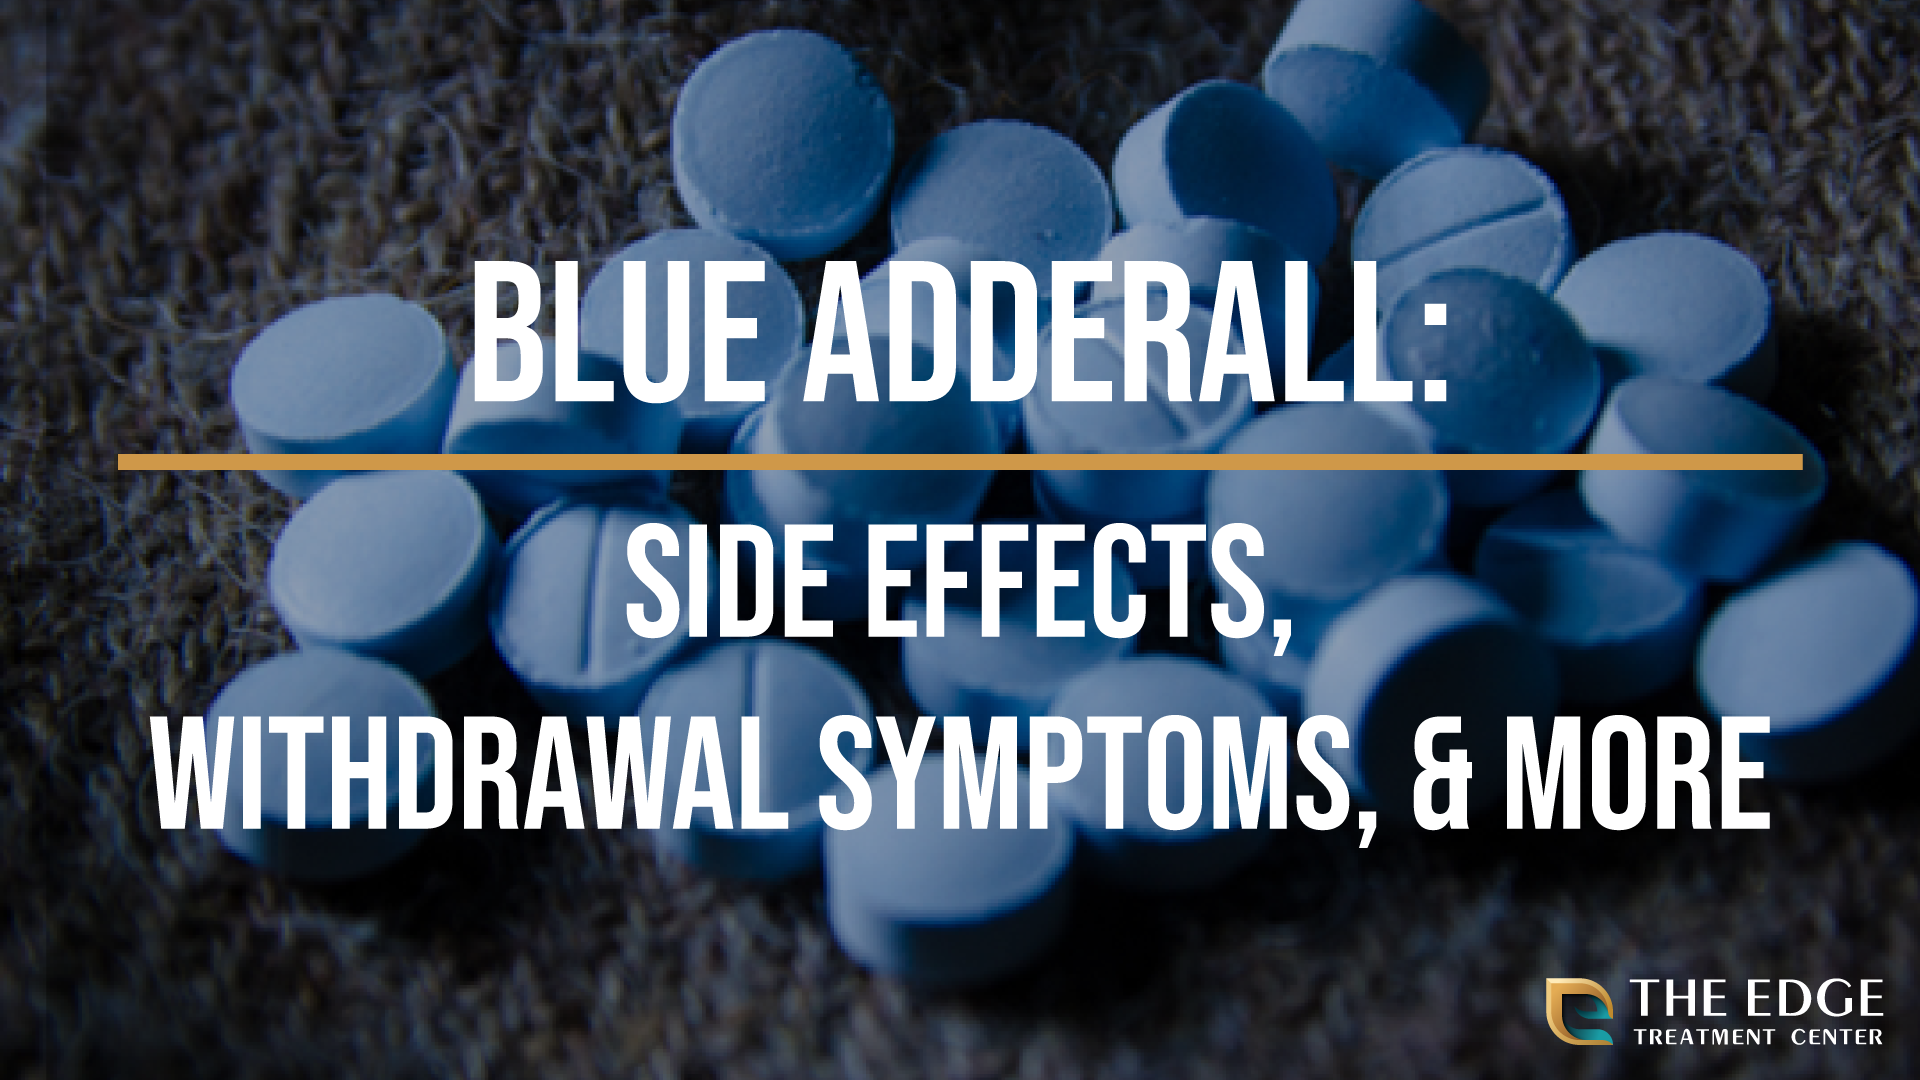 Modafinil Vs Adderall: Safety And Efficacy